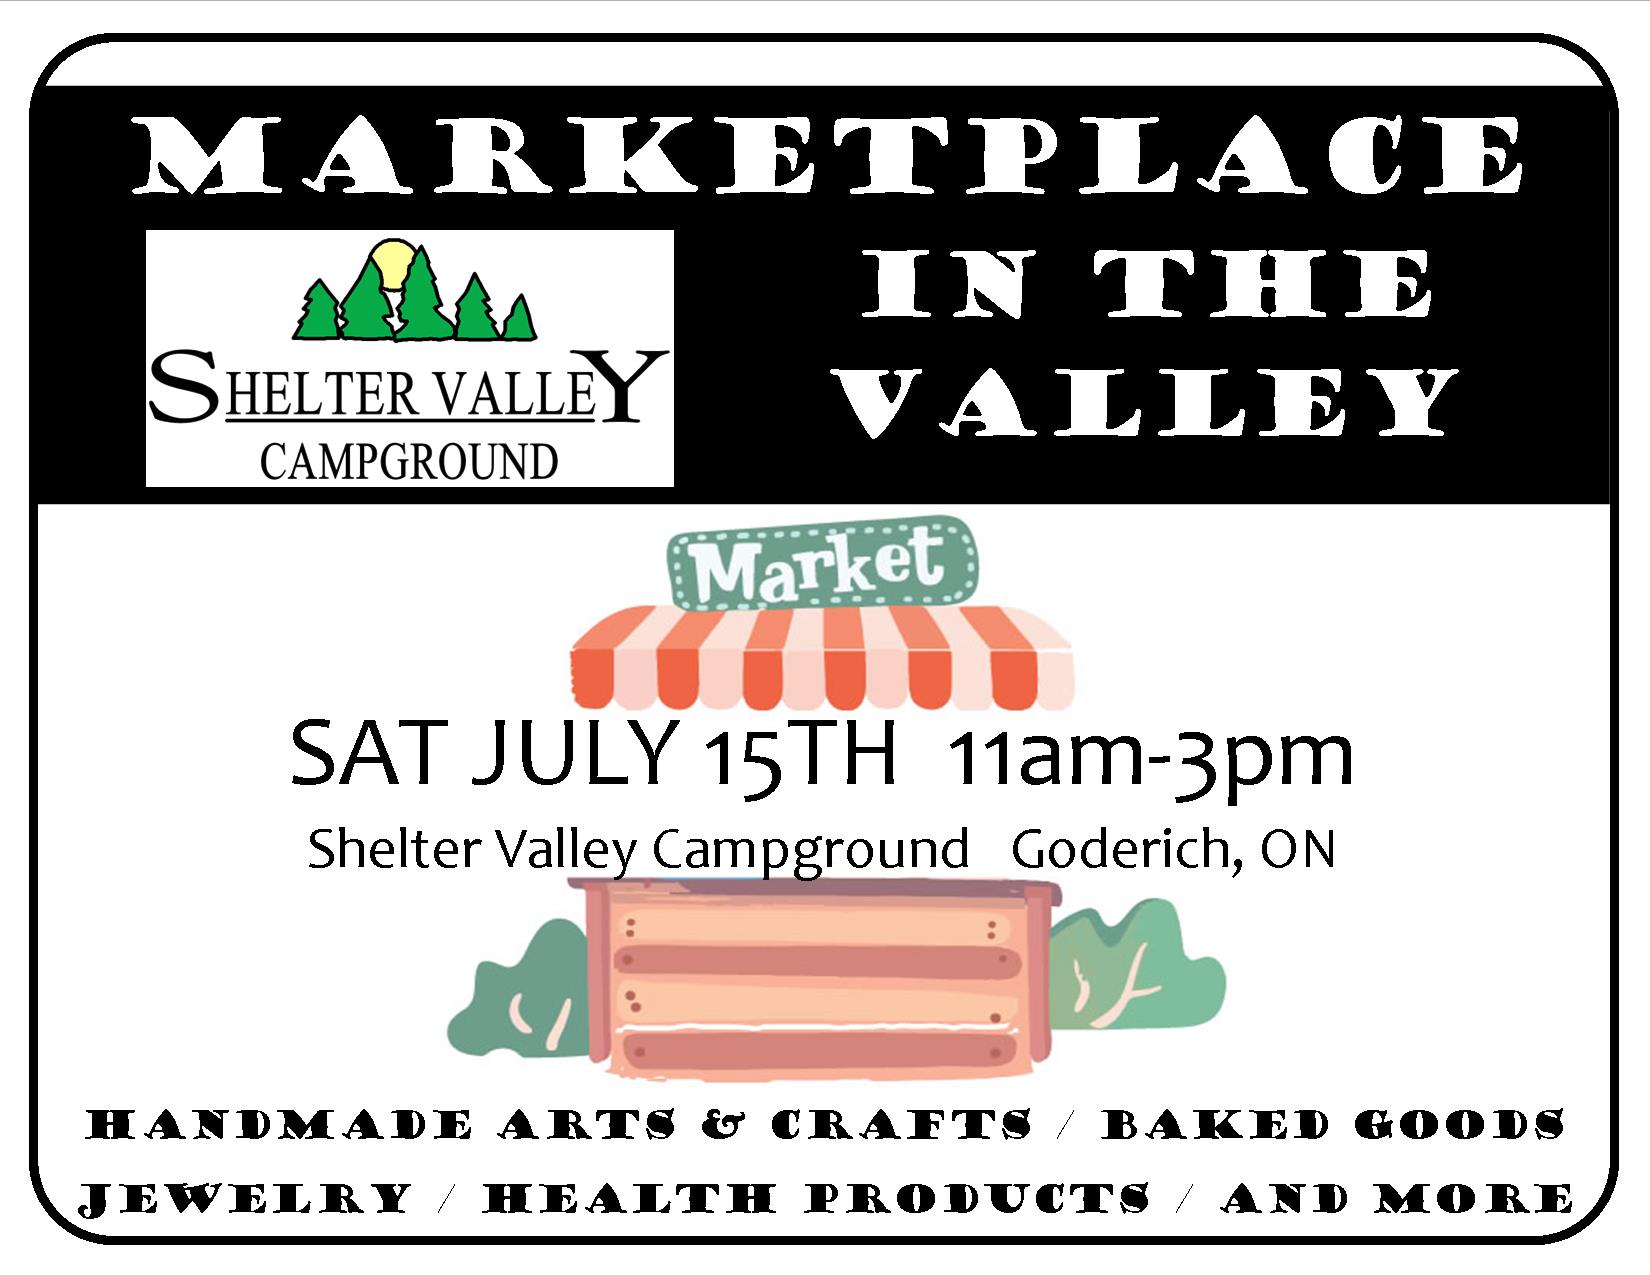 Marketplace in the Valley